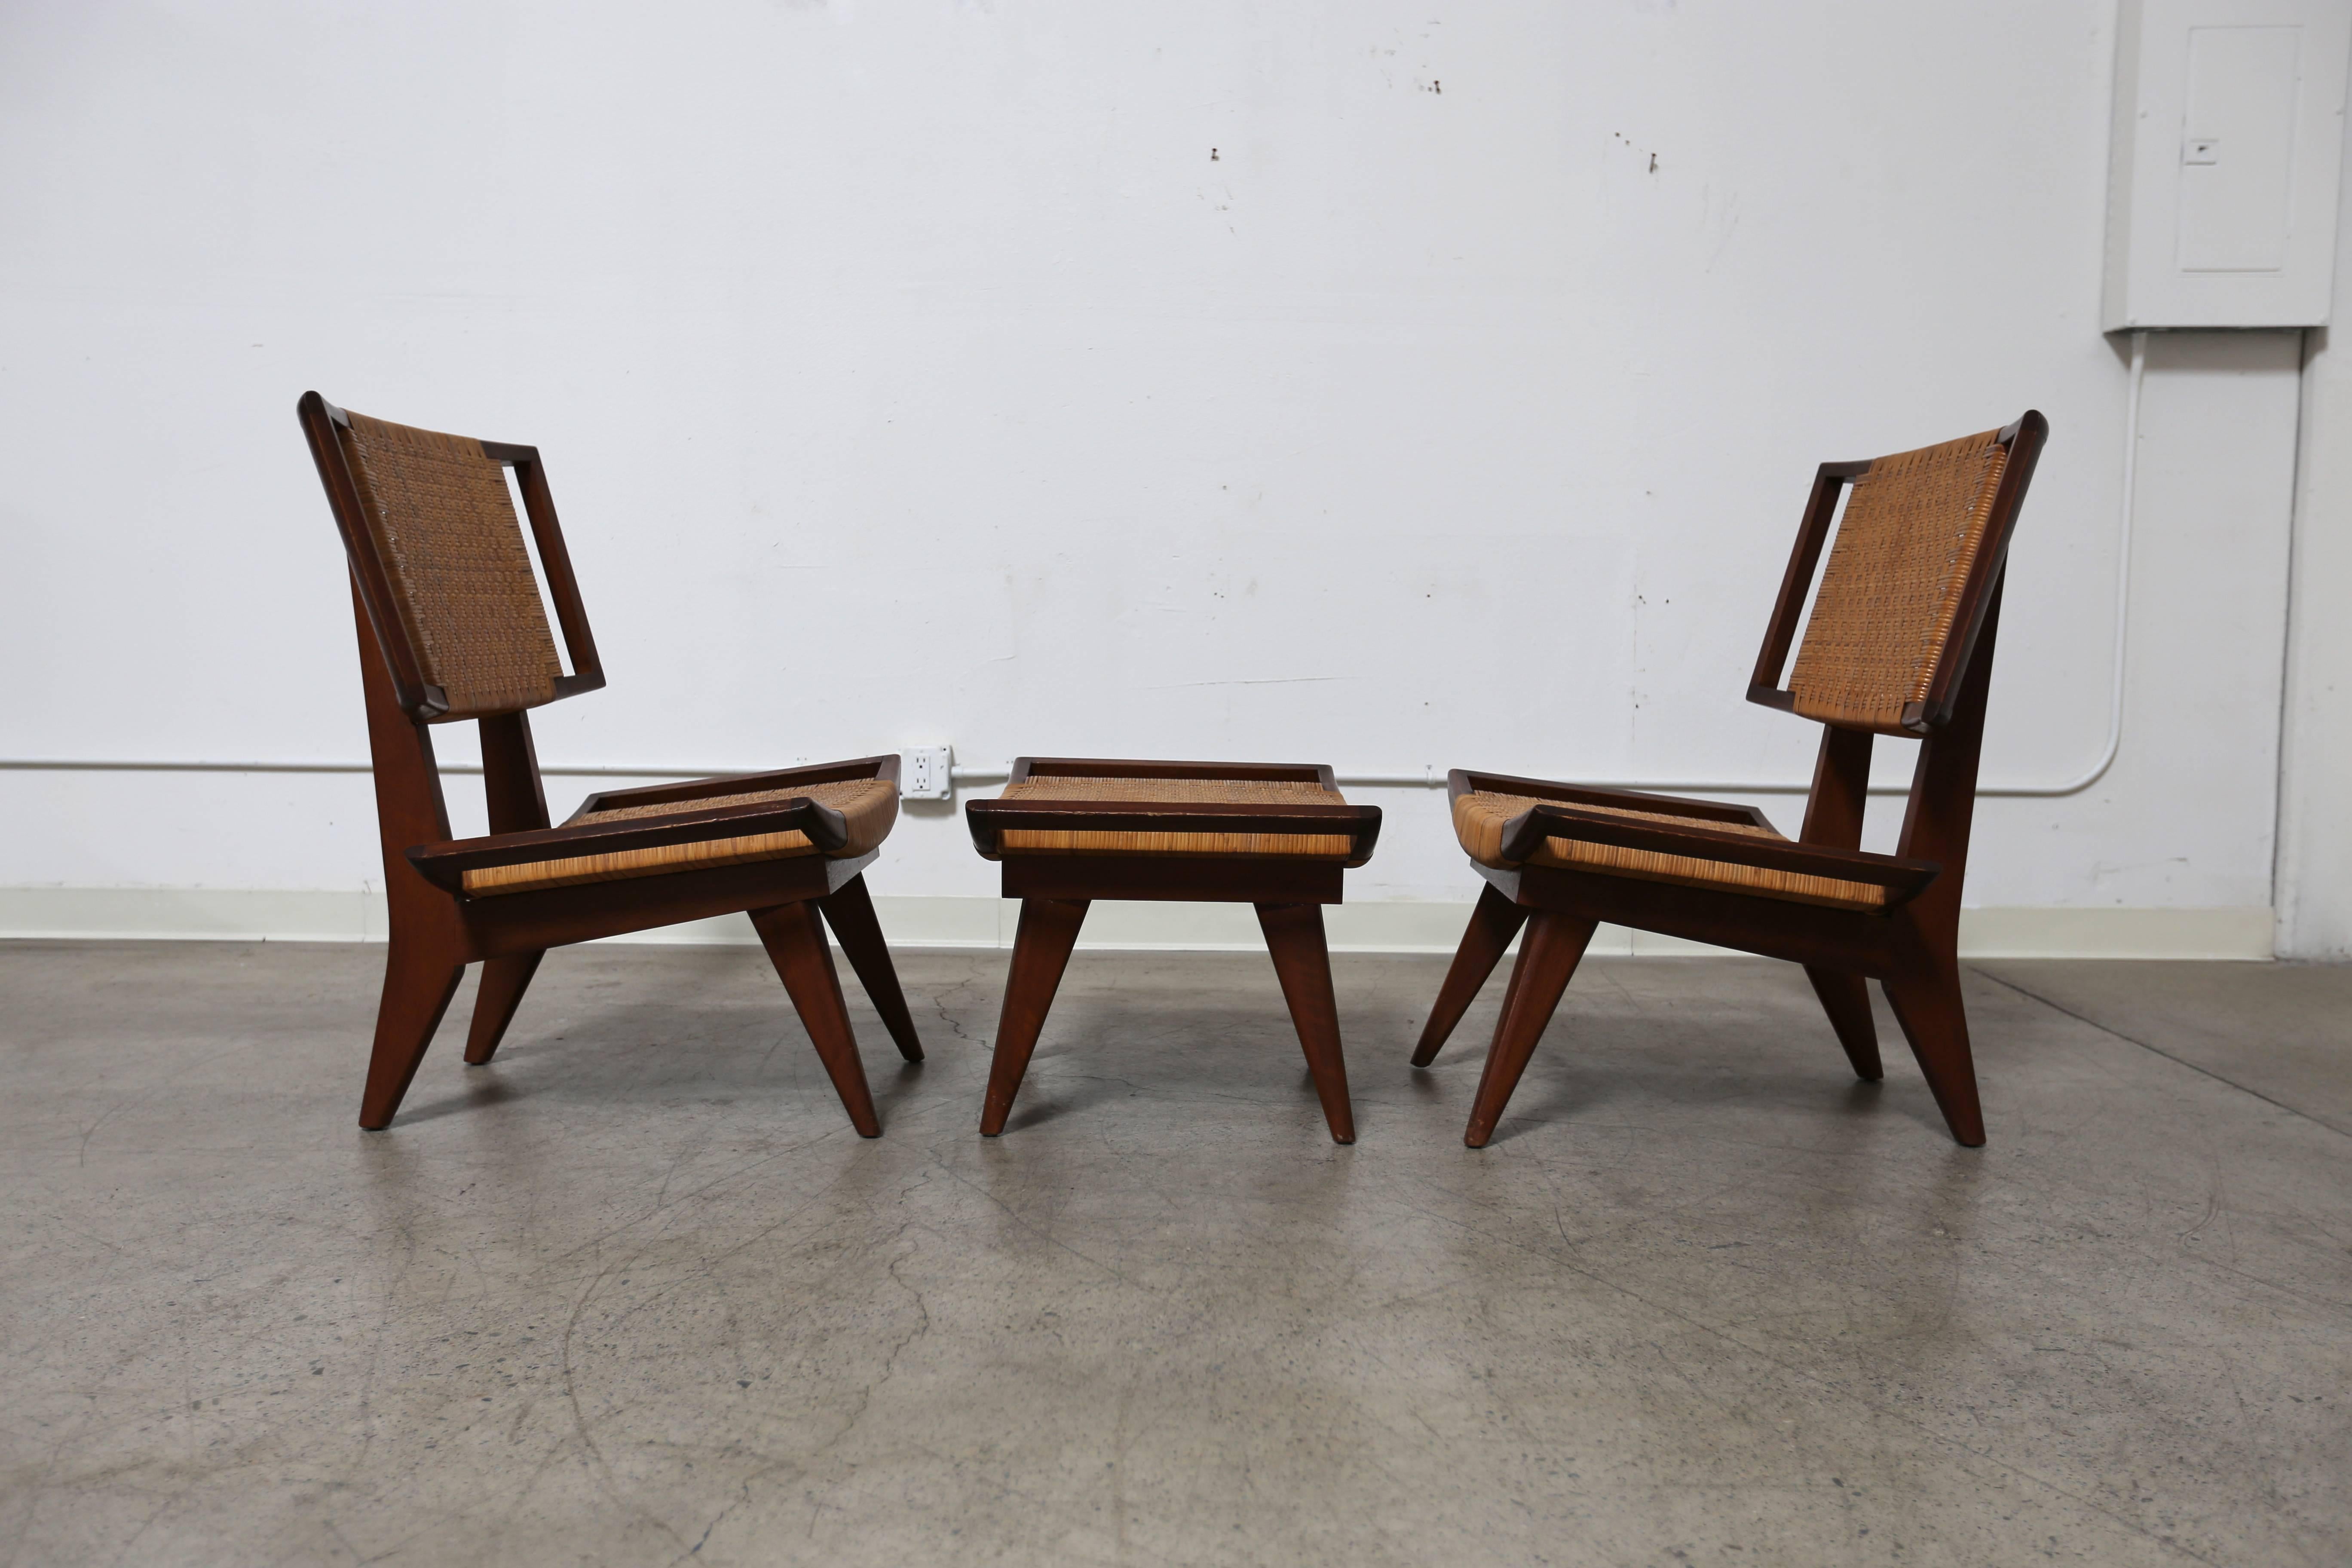 Pair of caned lounge chairs by Paul Laszlo. This set includes one ottoman. 

The ottoman measures 29